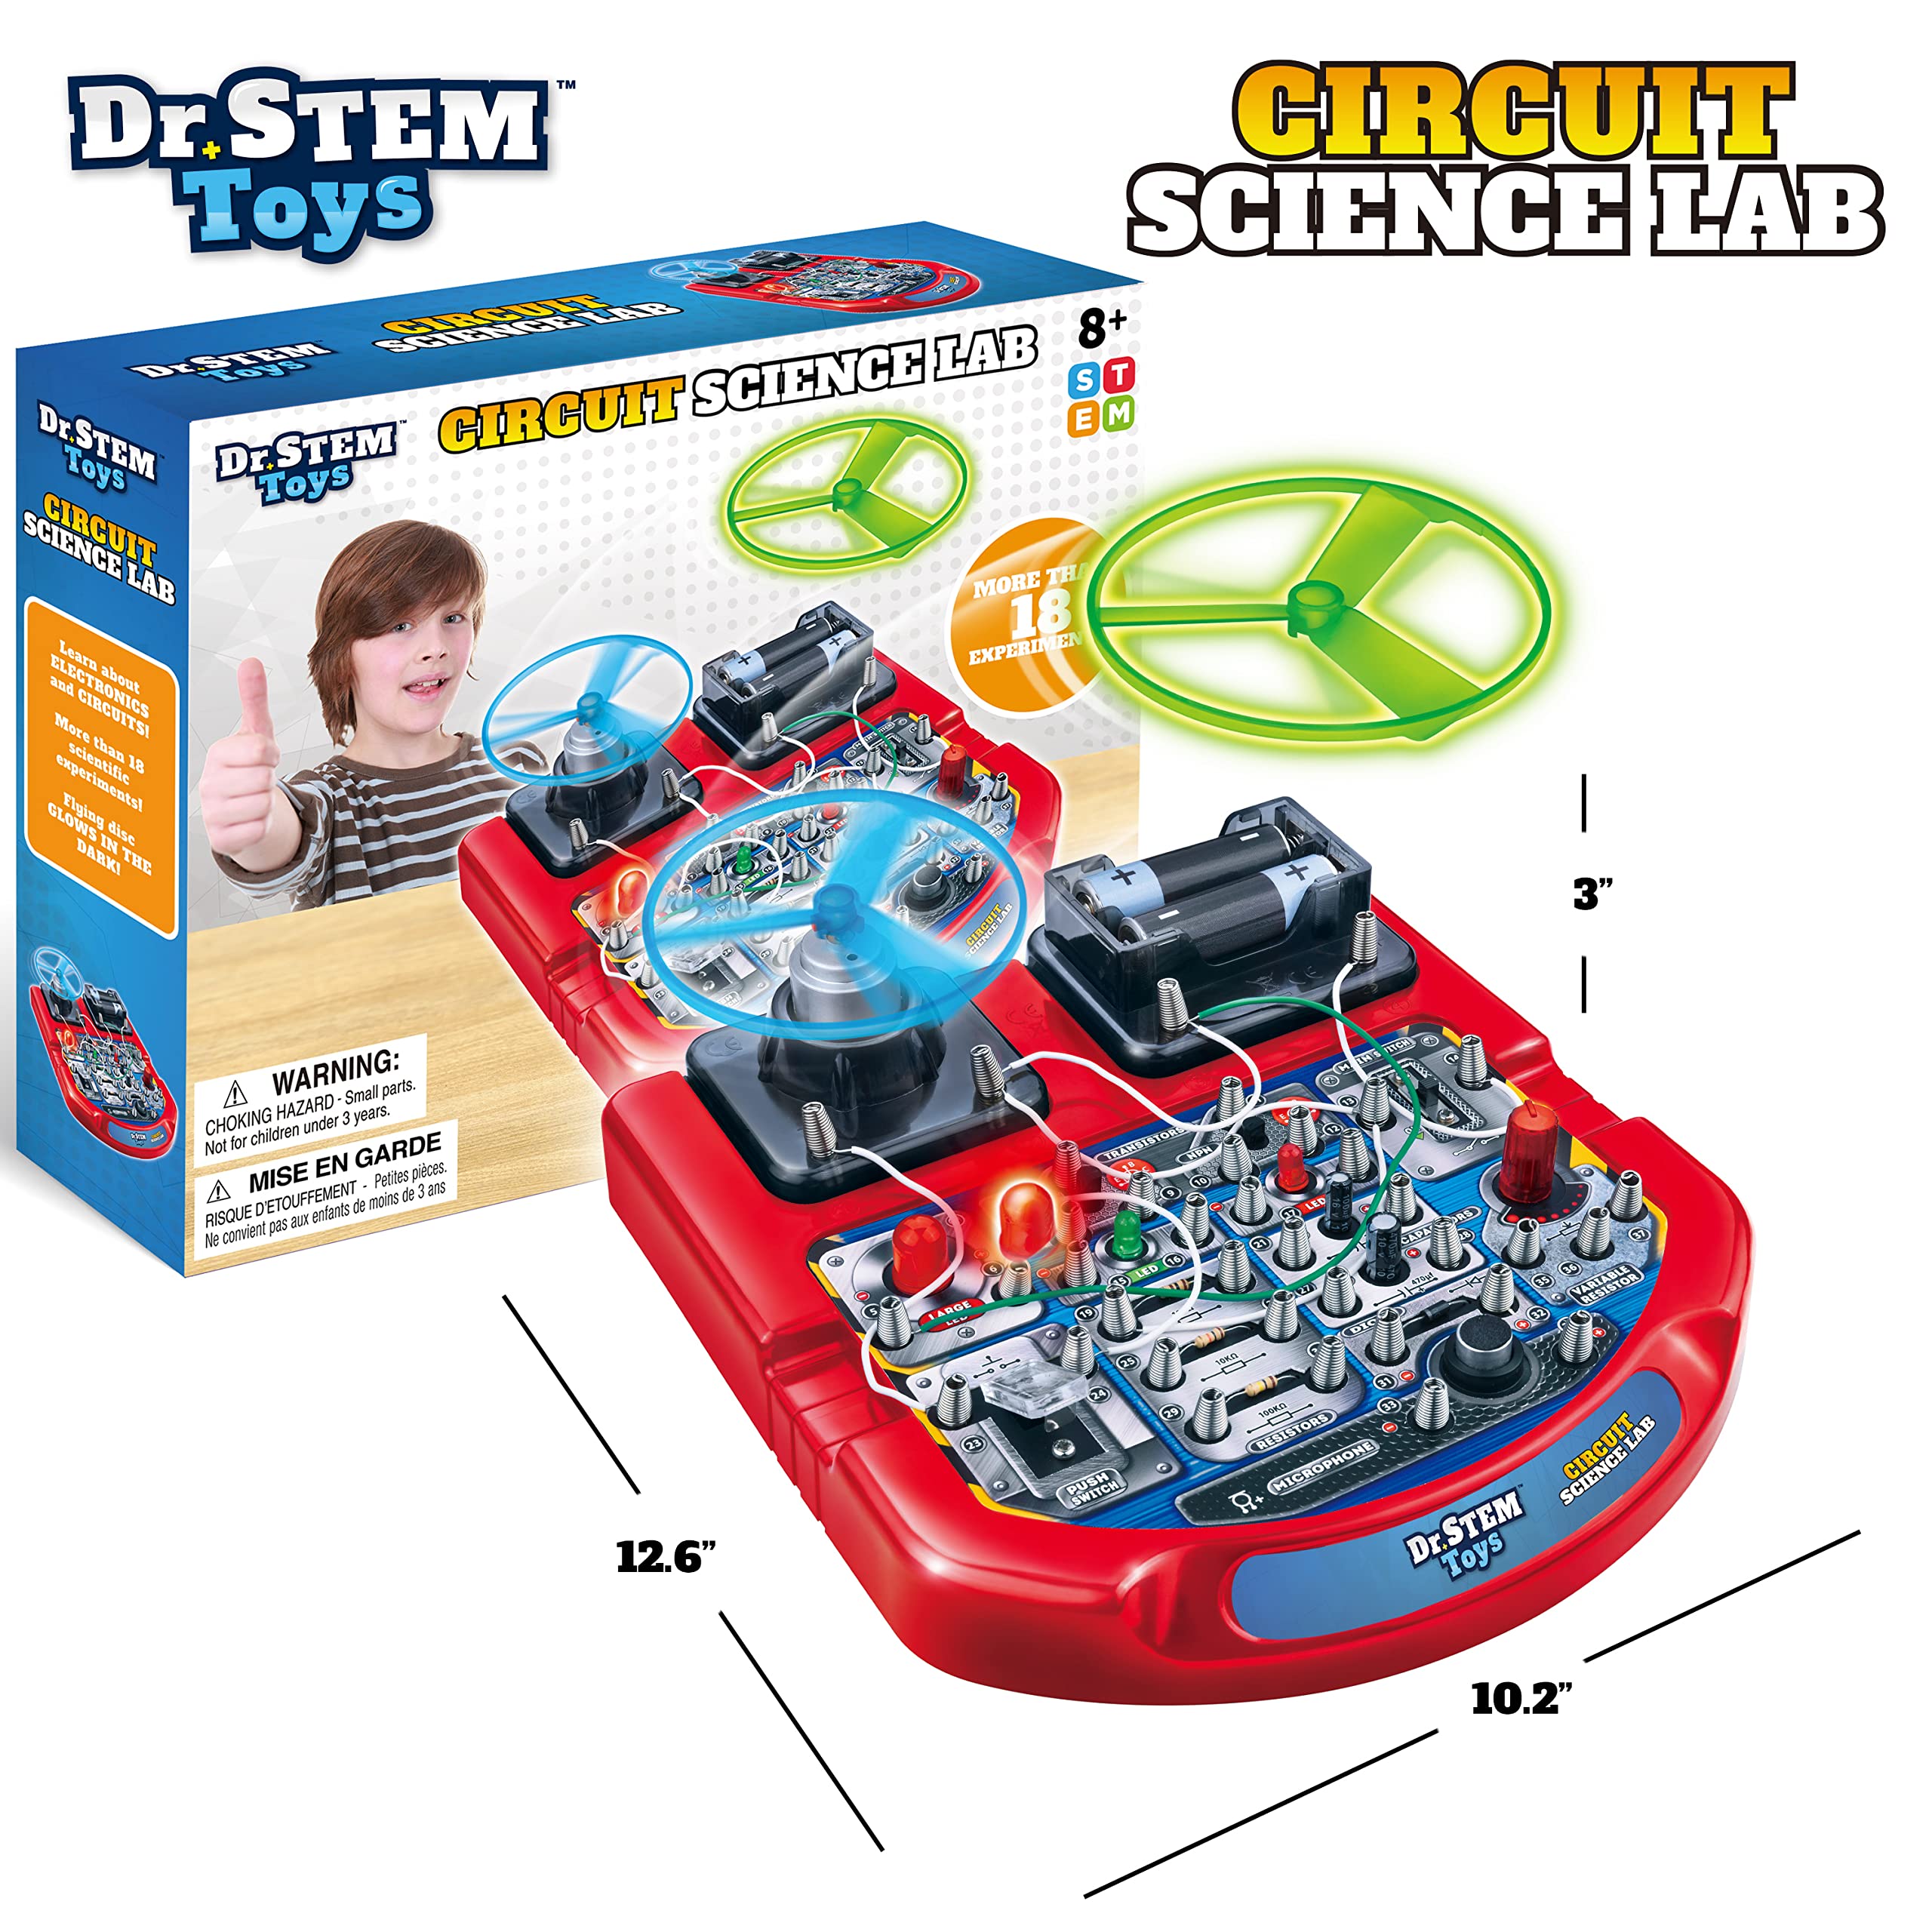 Dr. STEM Toys Circuit Board for Kids | Fun Educational Science Kit with Real Wires, LED Lights & a Fan That Actually Flies | Includes 18 Cool Science Experiments for Boys & Girls Ages 8 & Up